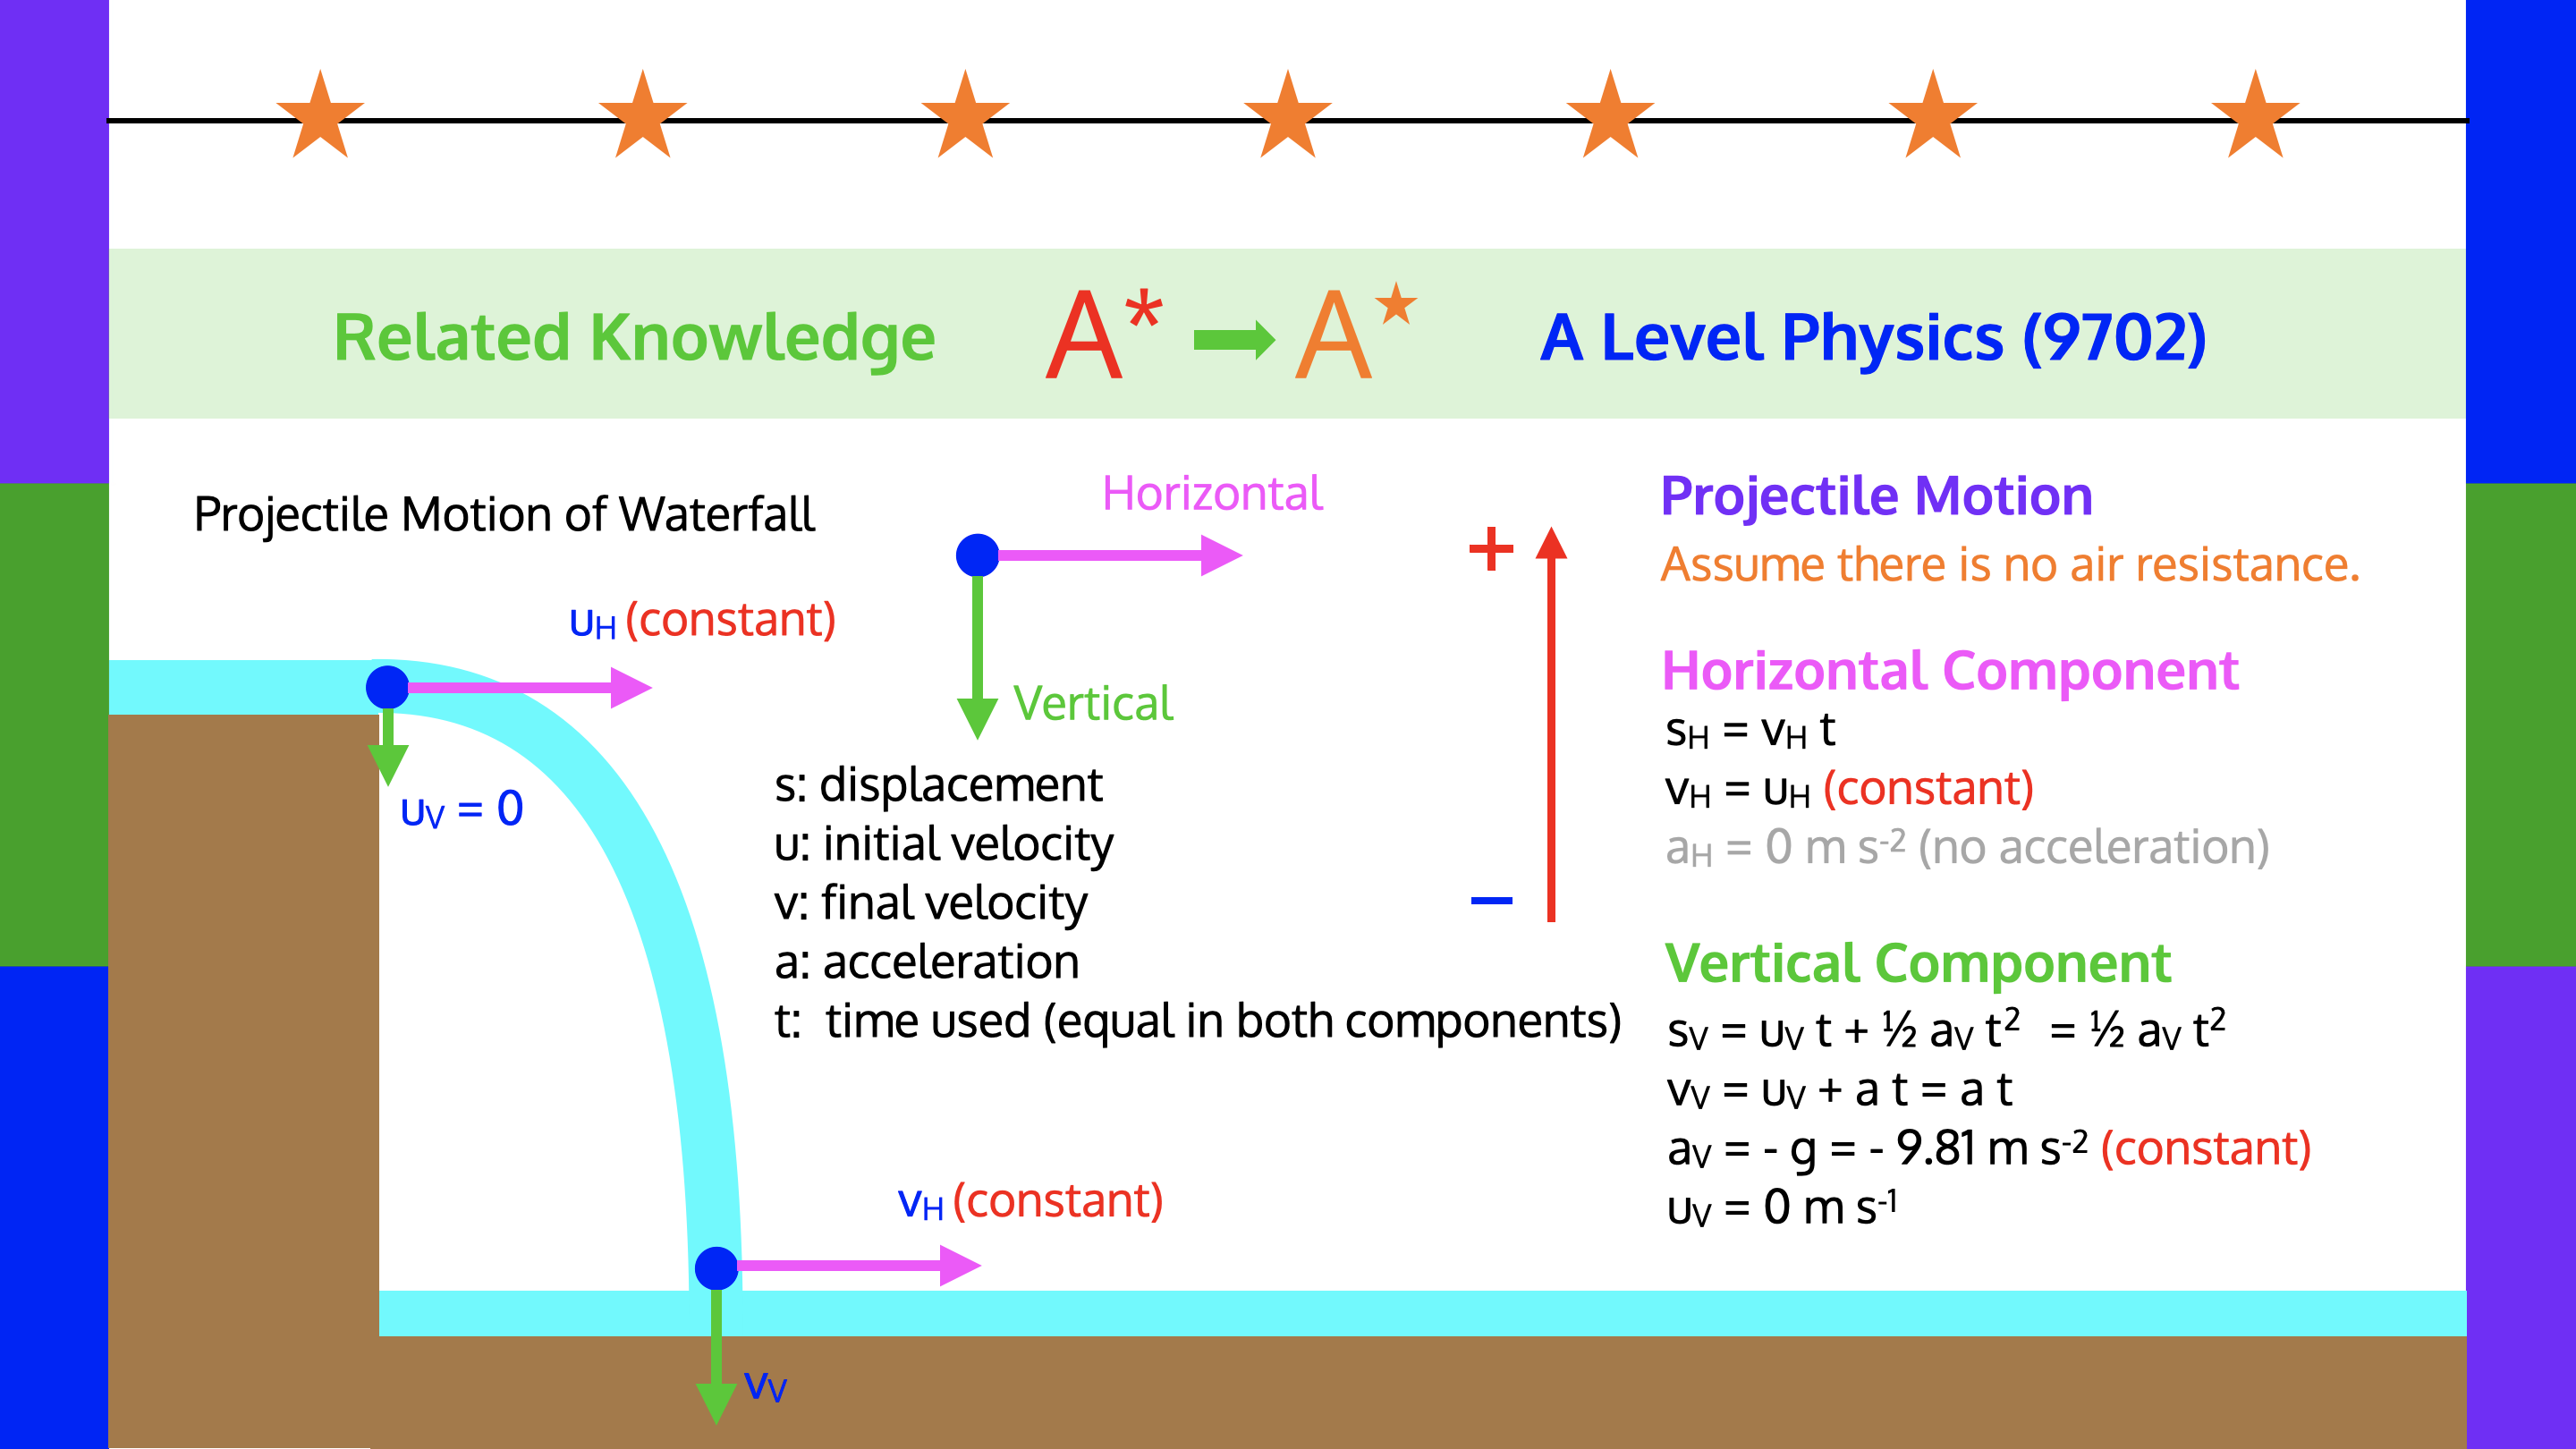 Physics (9702) Knowledge: Projectile Motion